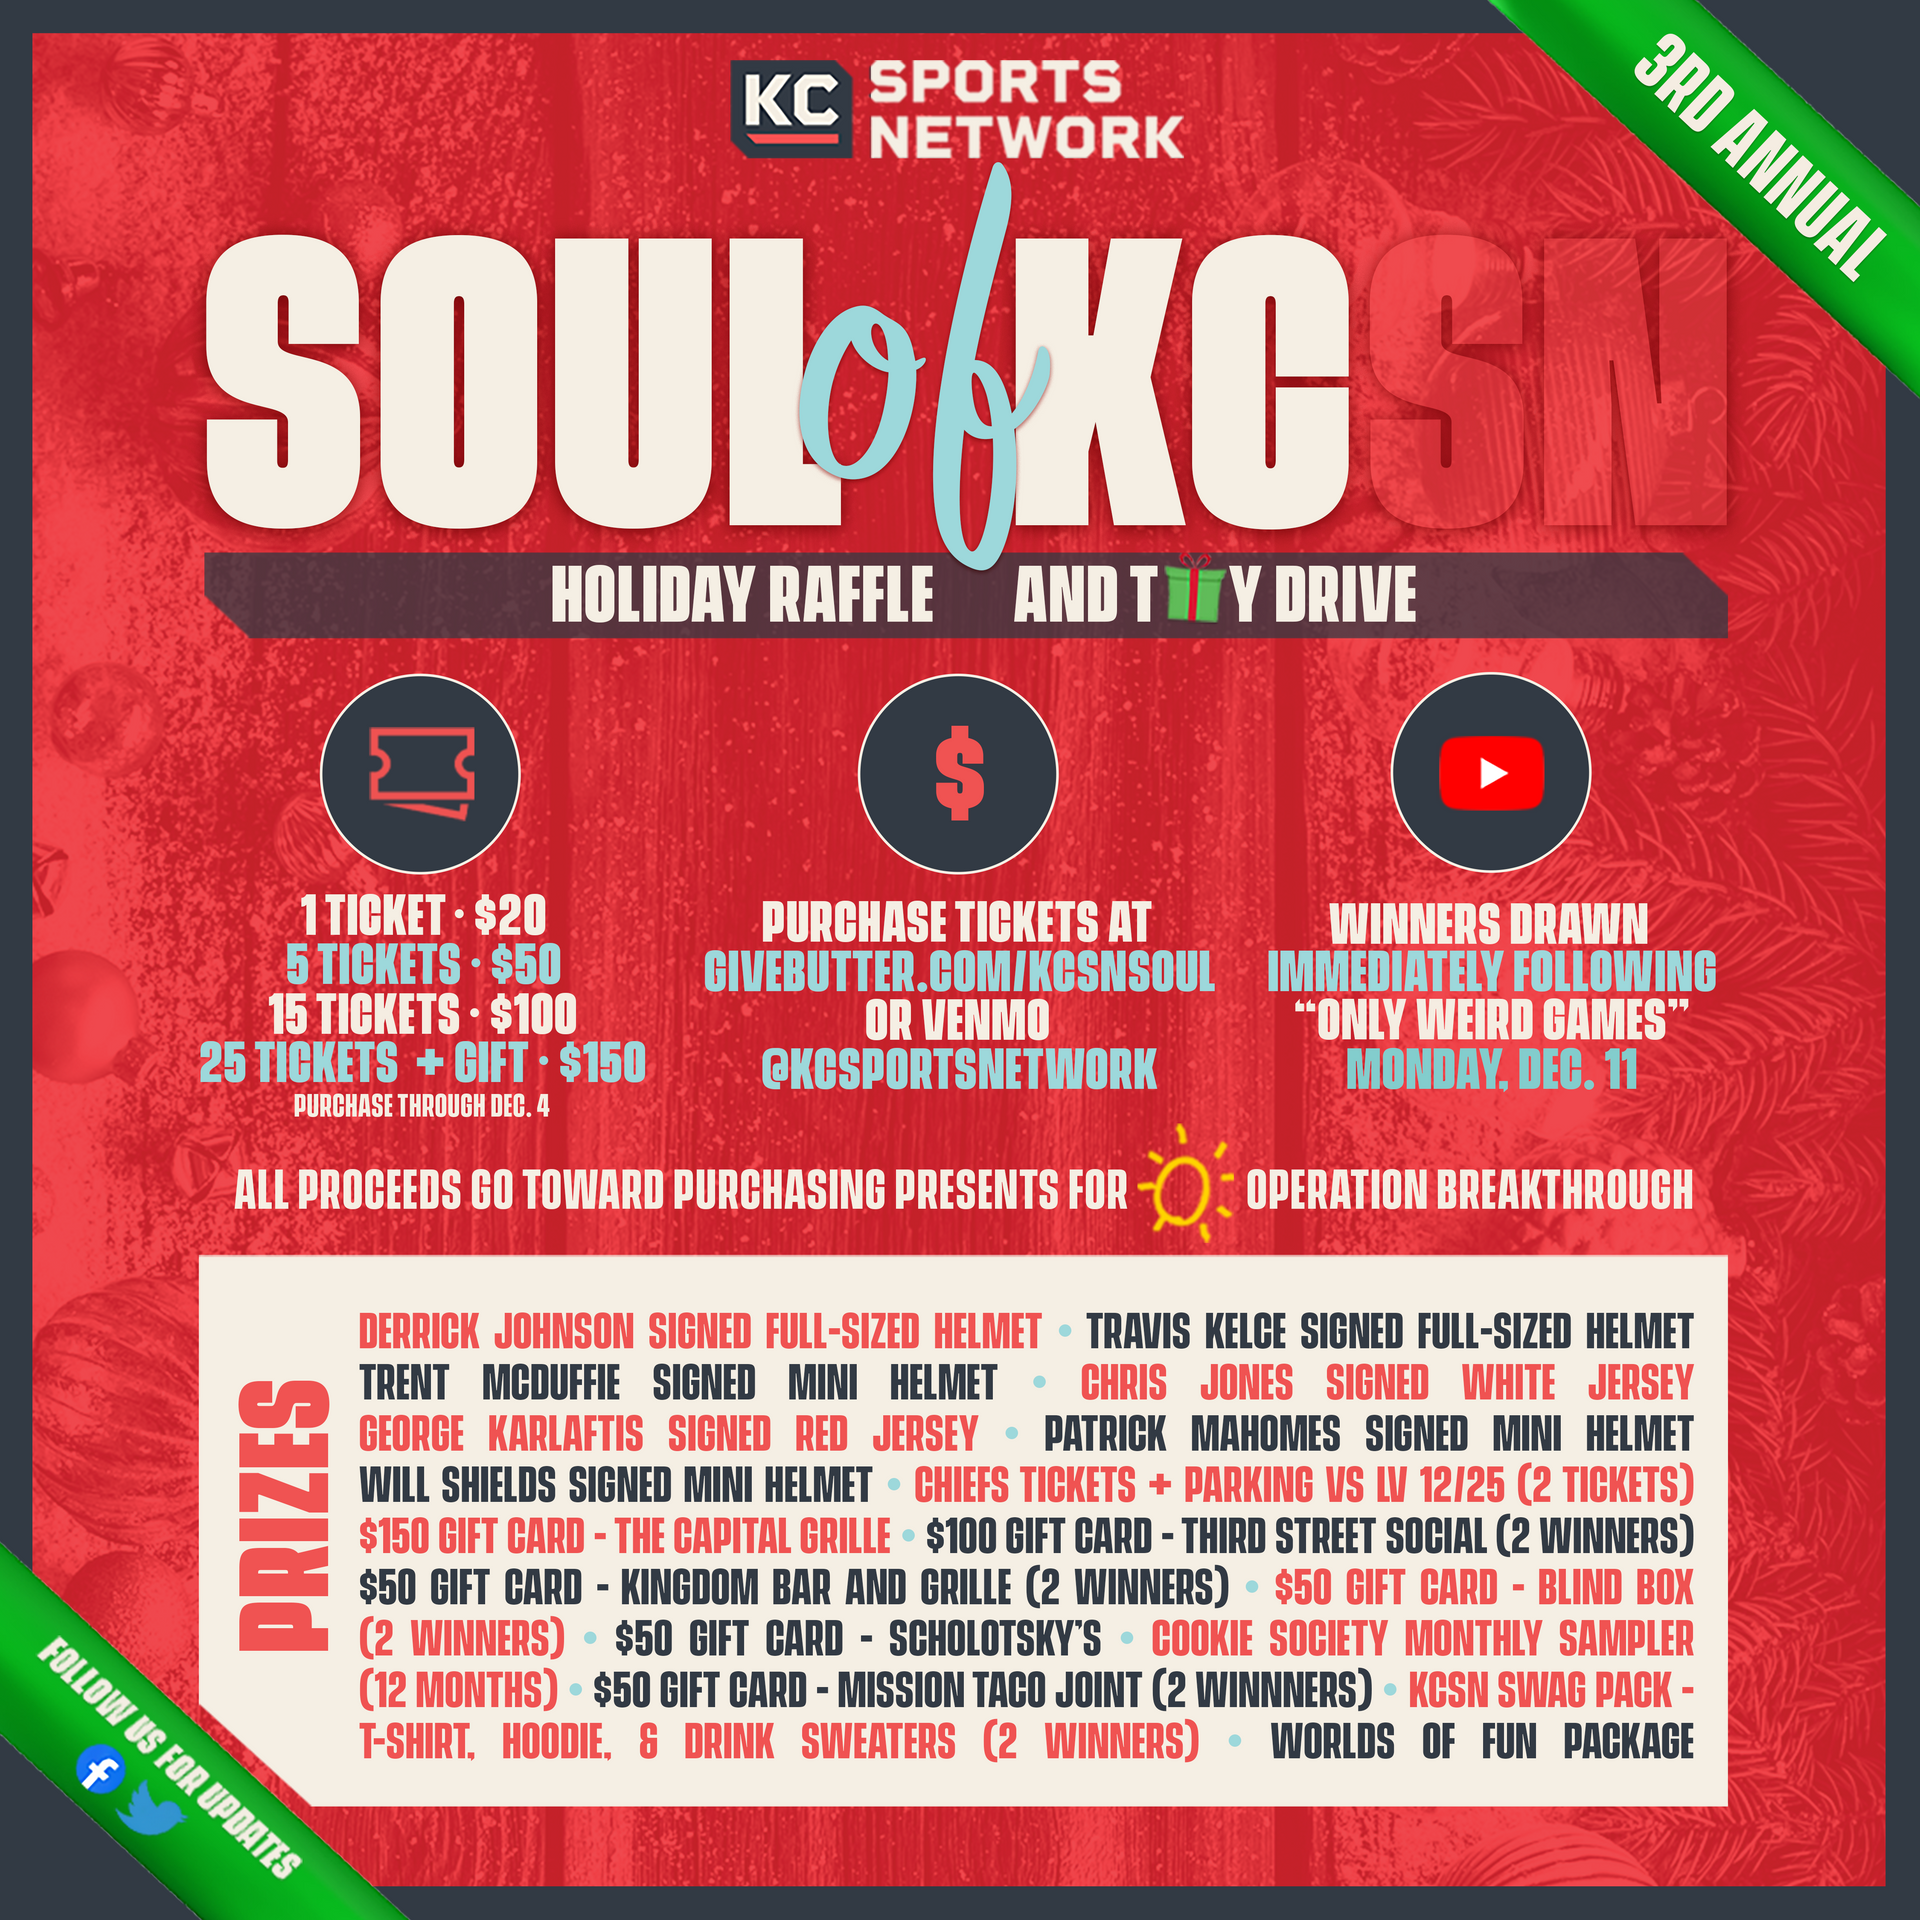 Soul of KC Holiday Raffle and Toy Drive